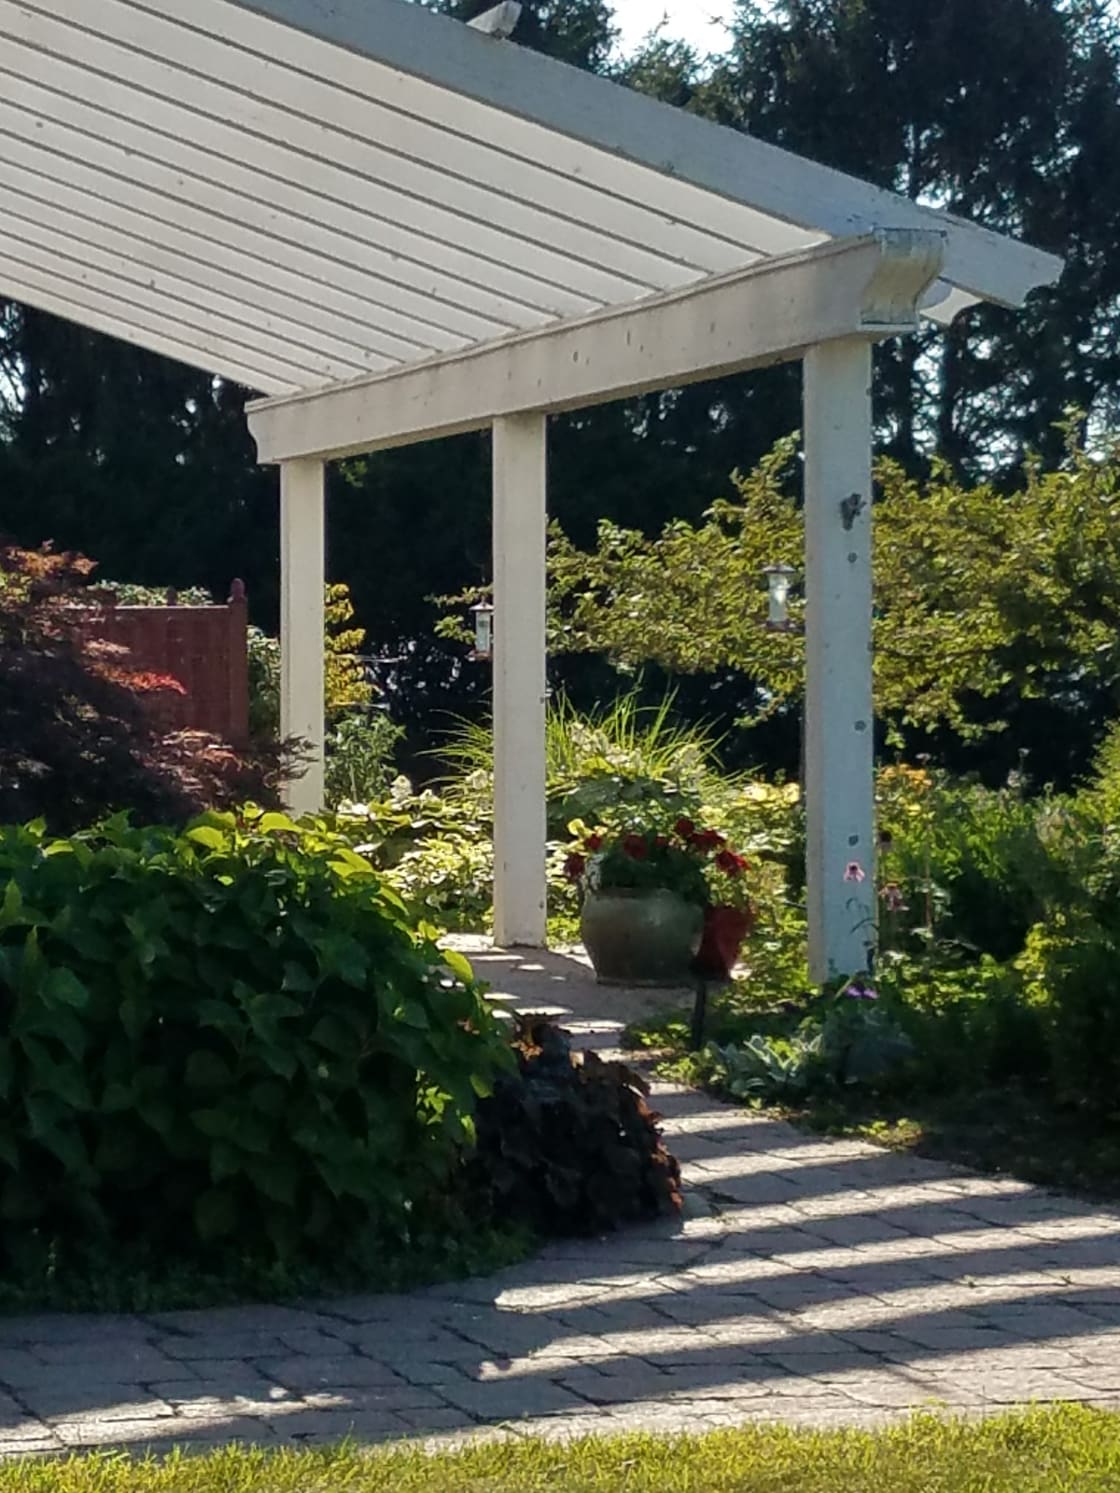 Under the pergola is the perfect place to relax.